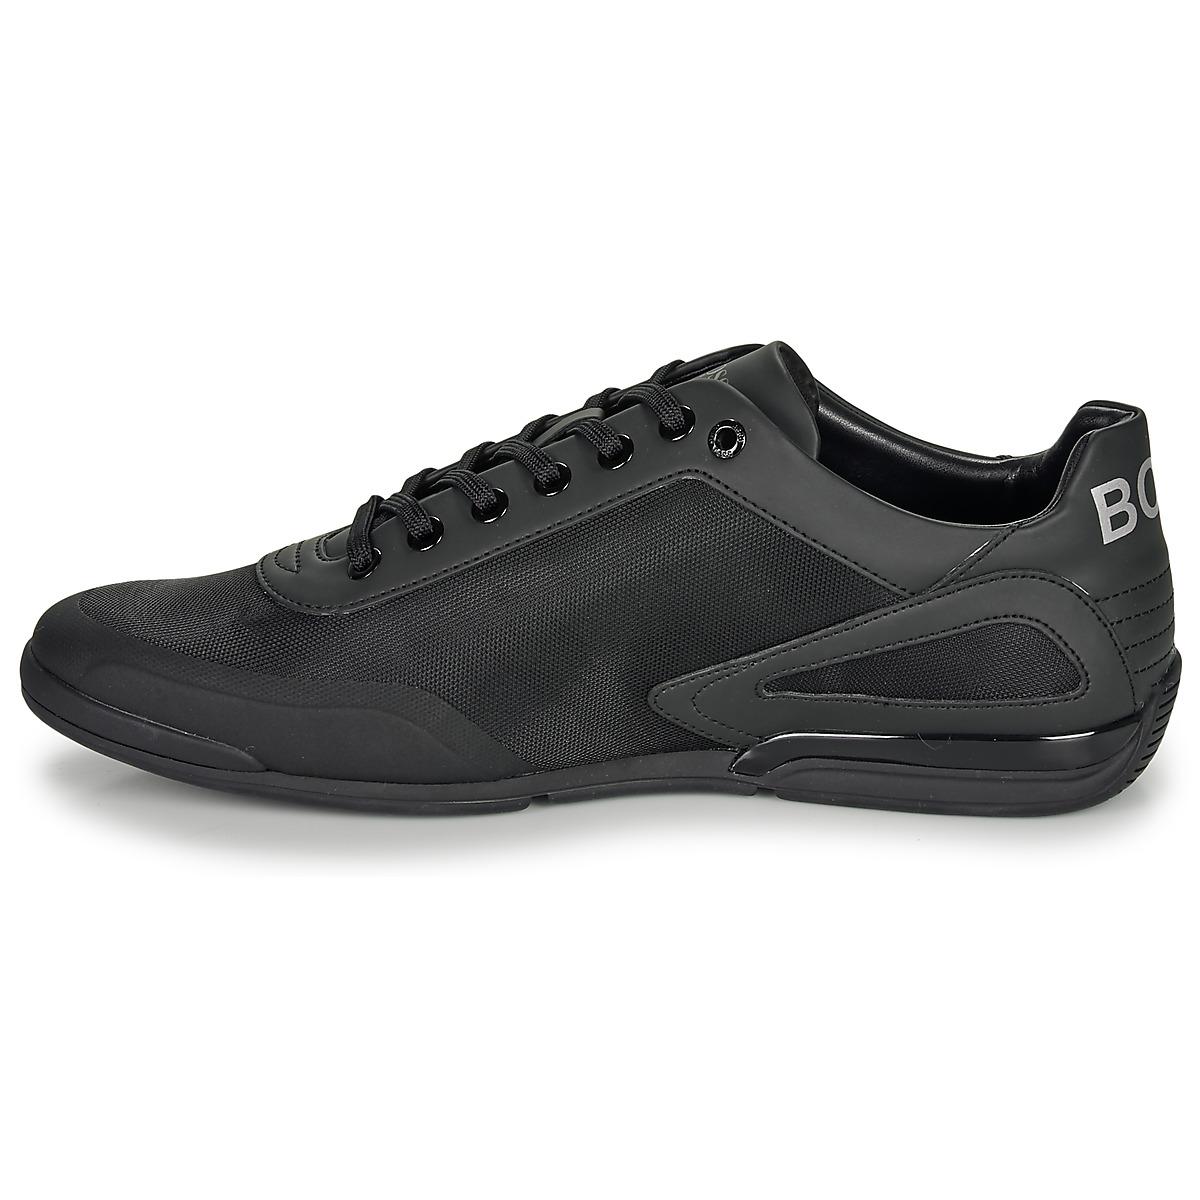 BOSS by Hugo Boss Saturn Lowp Act4 Shoes (trainers) in Black for Men - Lyst